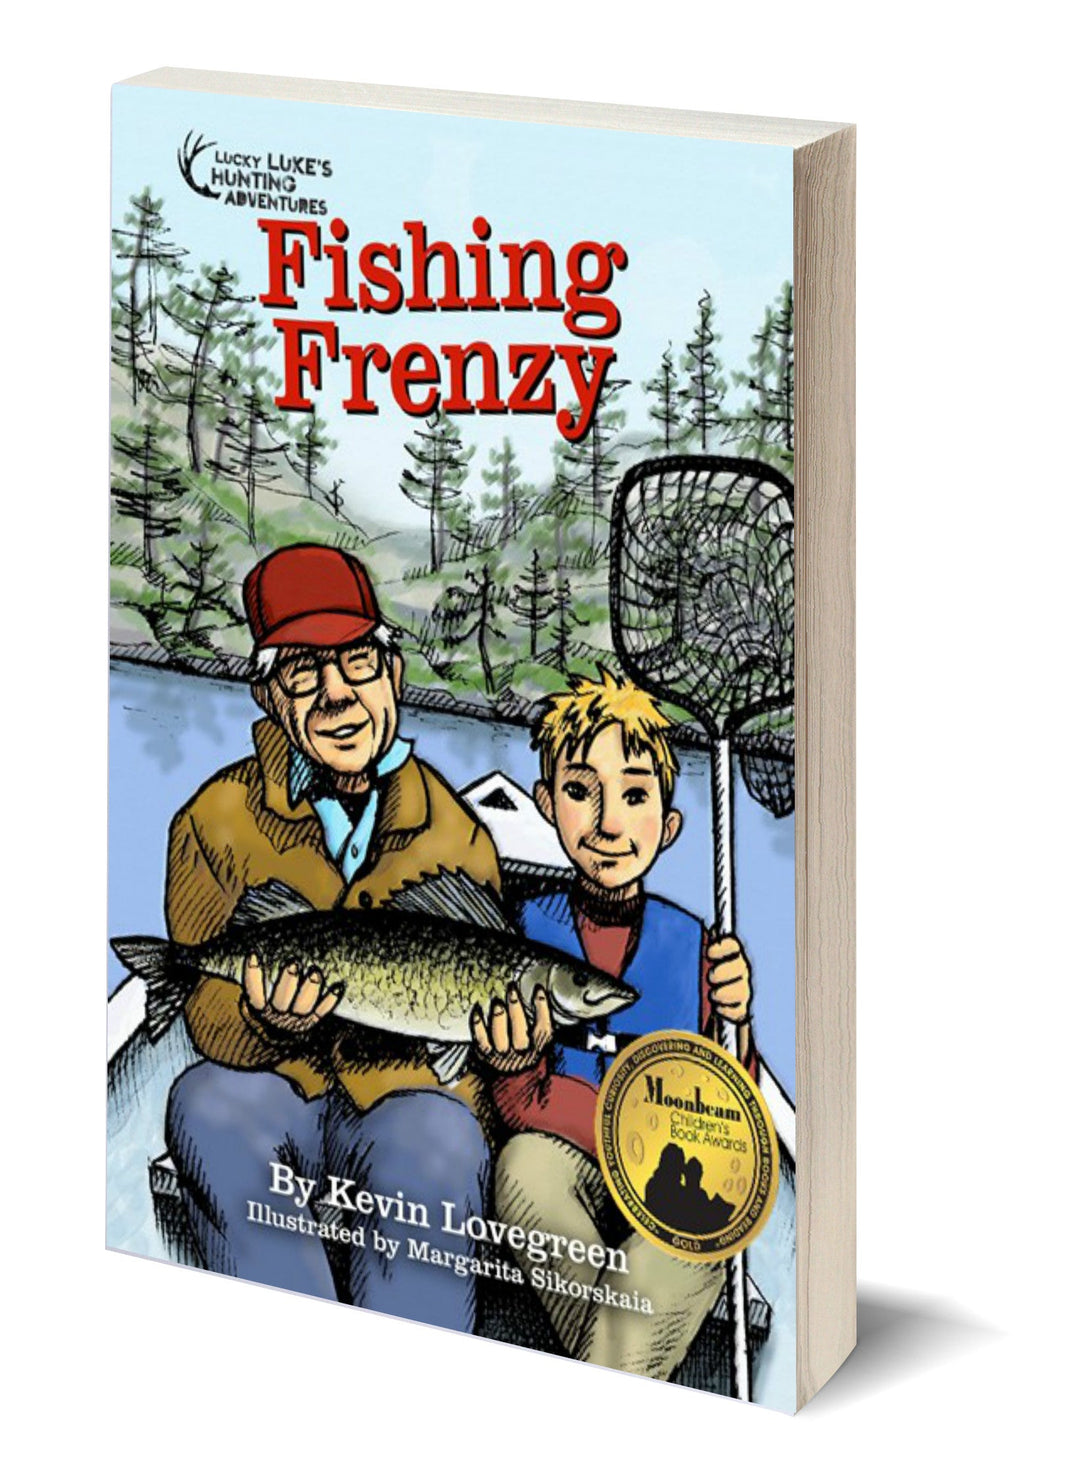 Local author works with big names in fishing on new children's